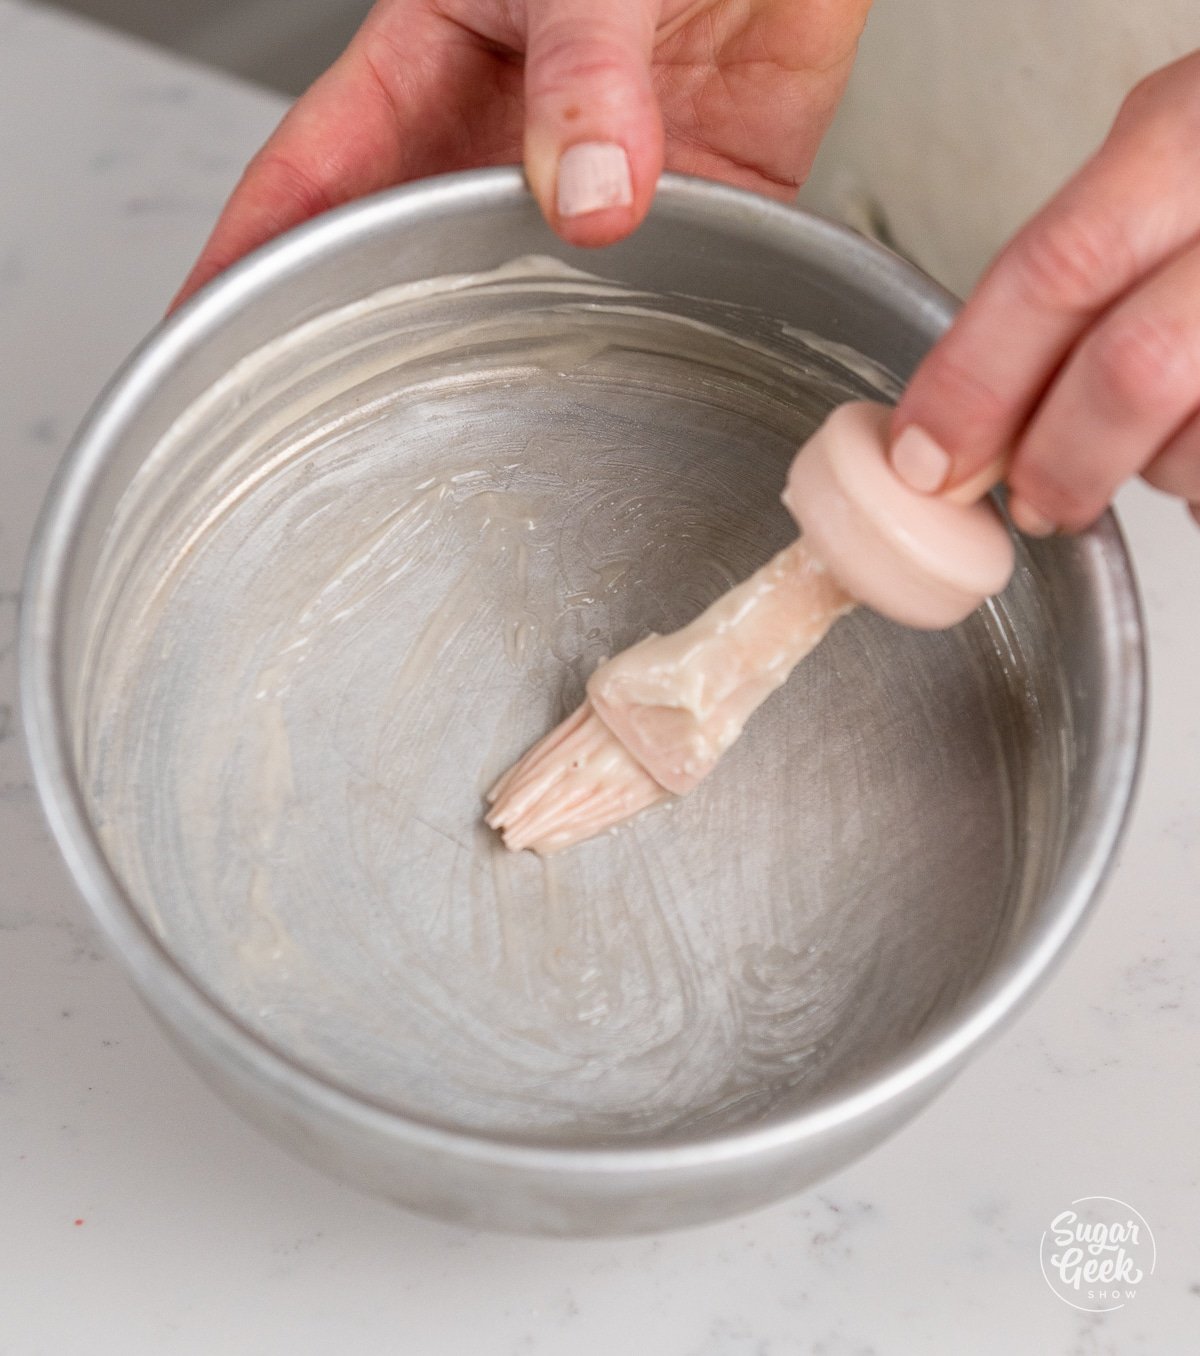 hands brushing cake goop into a cake pan with a pastry brush.